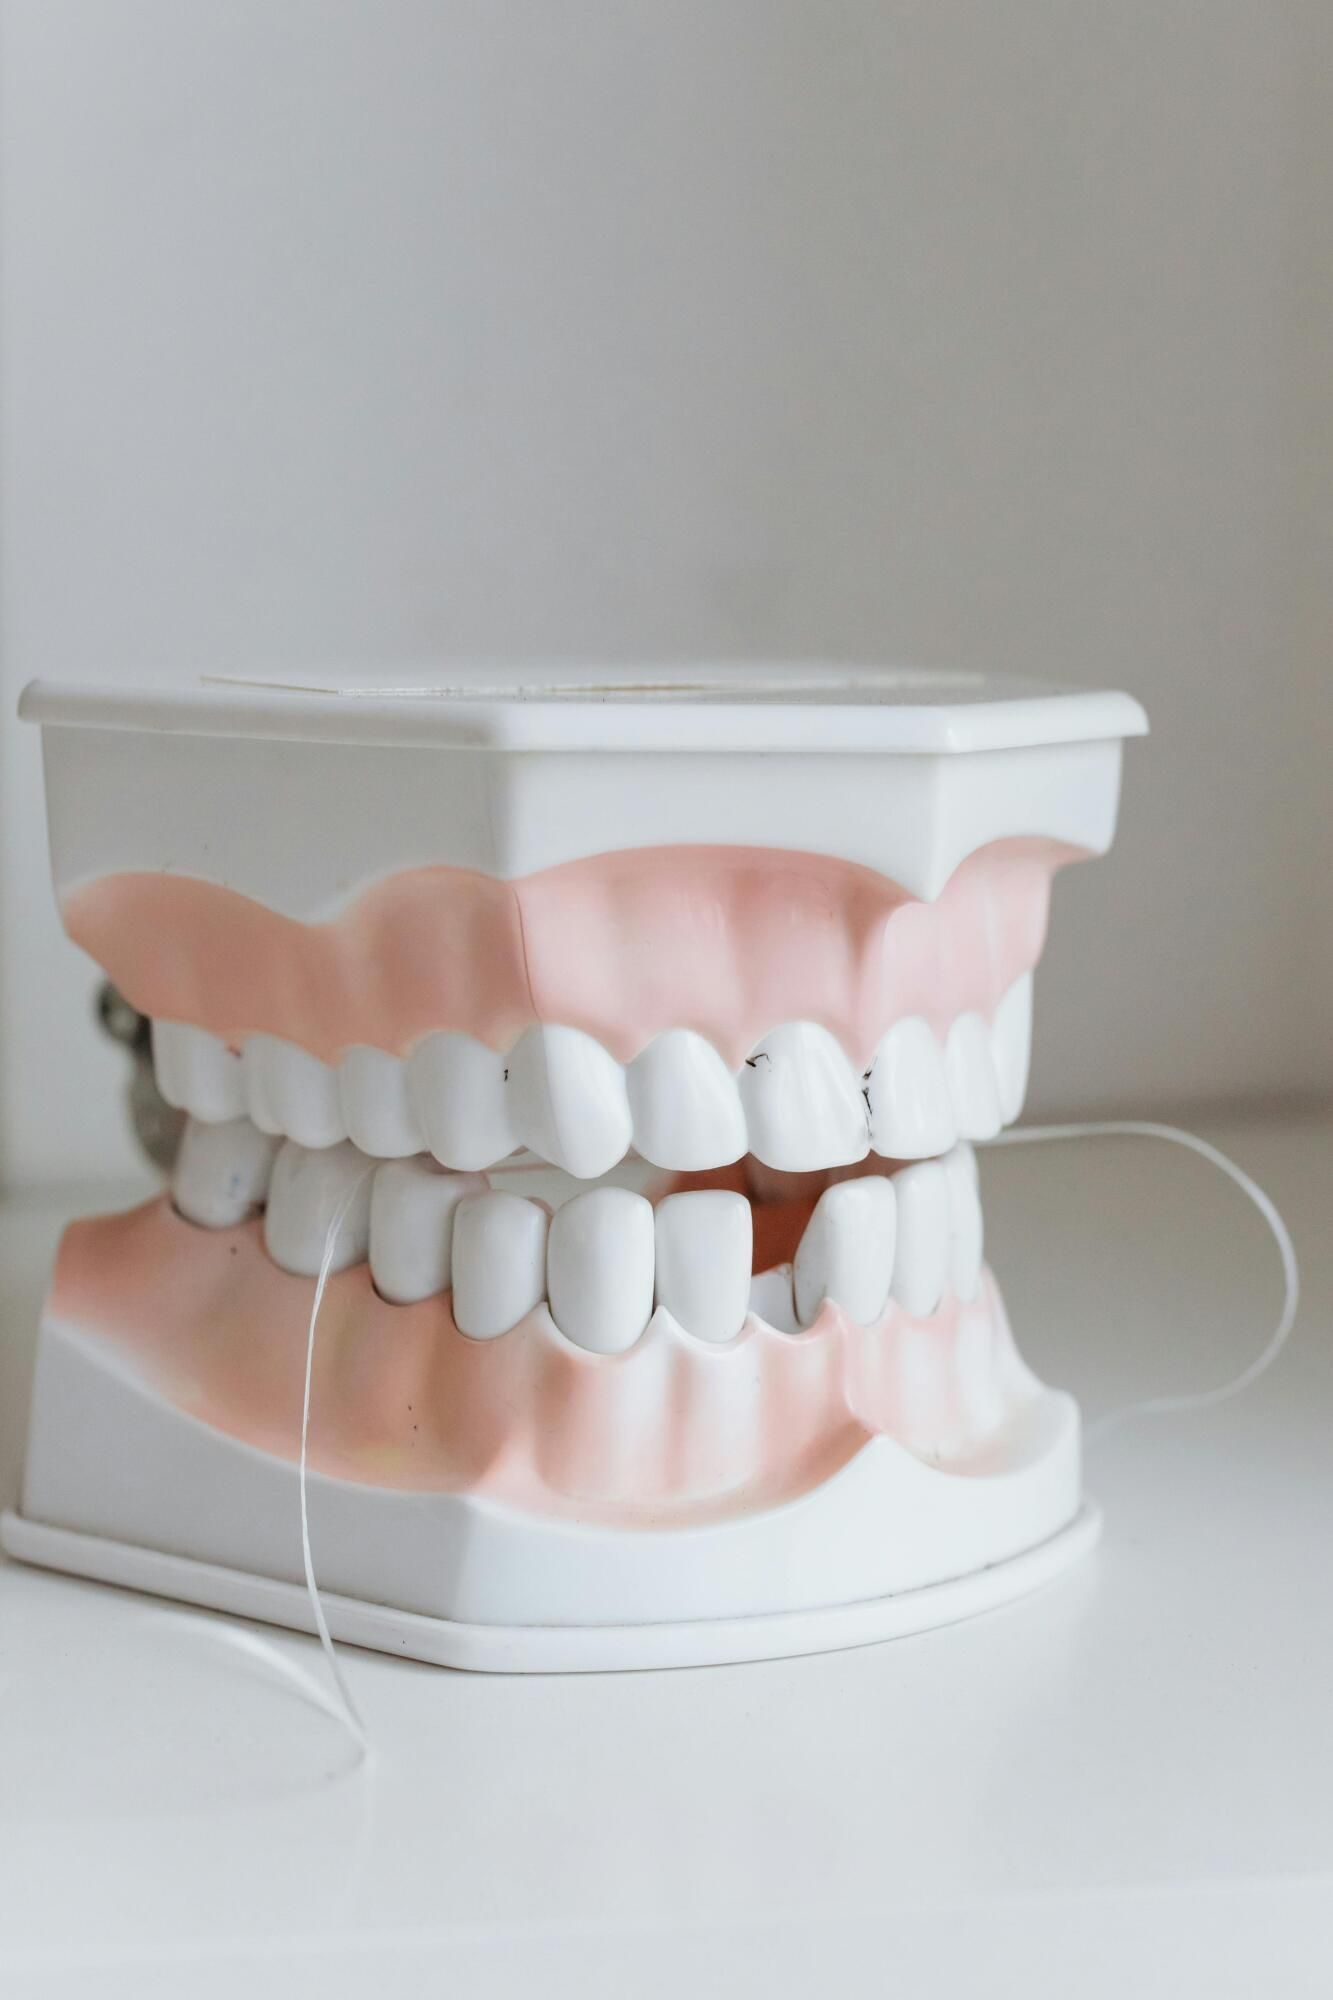 a model of a person 's teeth with dental floss attached to it .